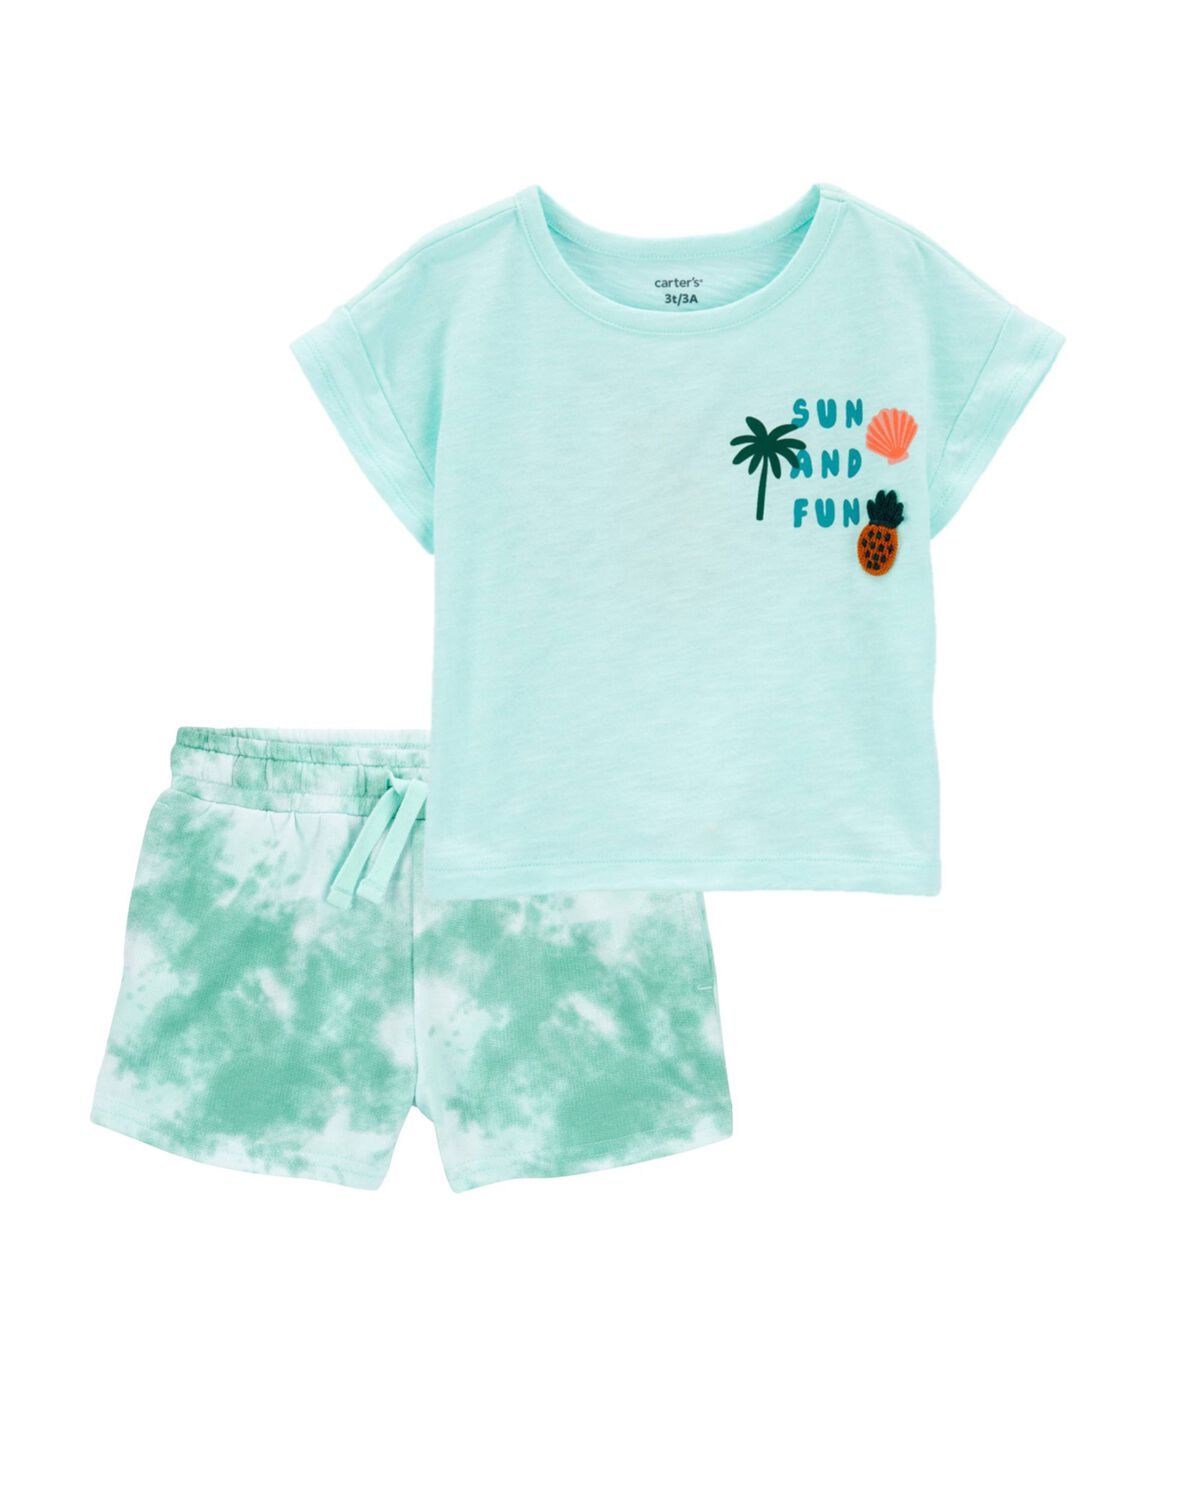 Toddler 2-Piece Sun And Fun Tee & Tie-Dye Pull-On Shorts Set | Carter's